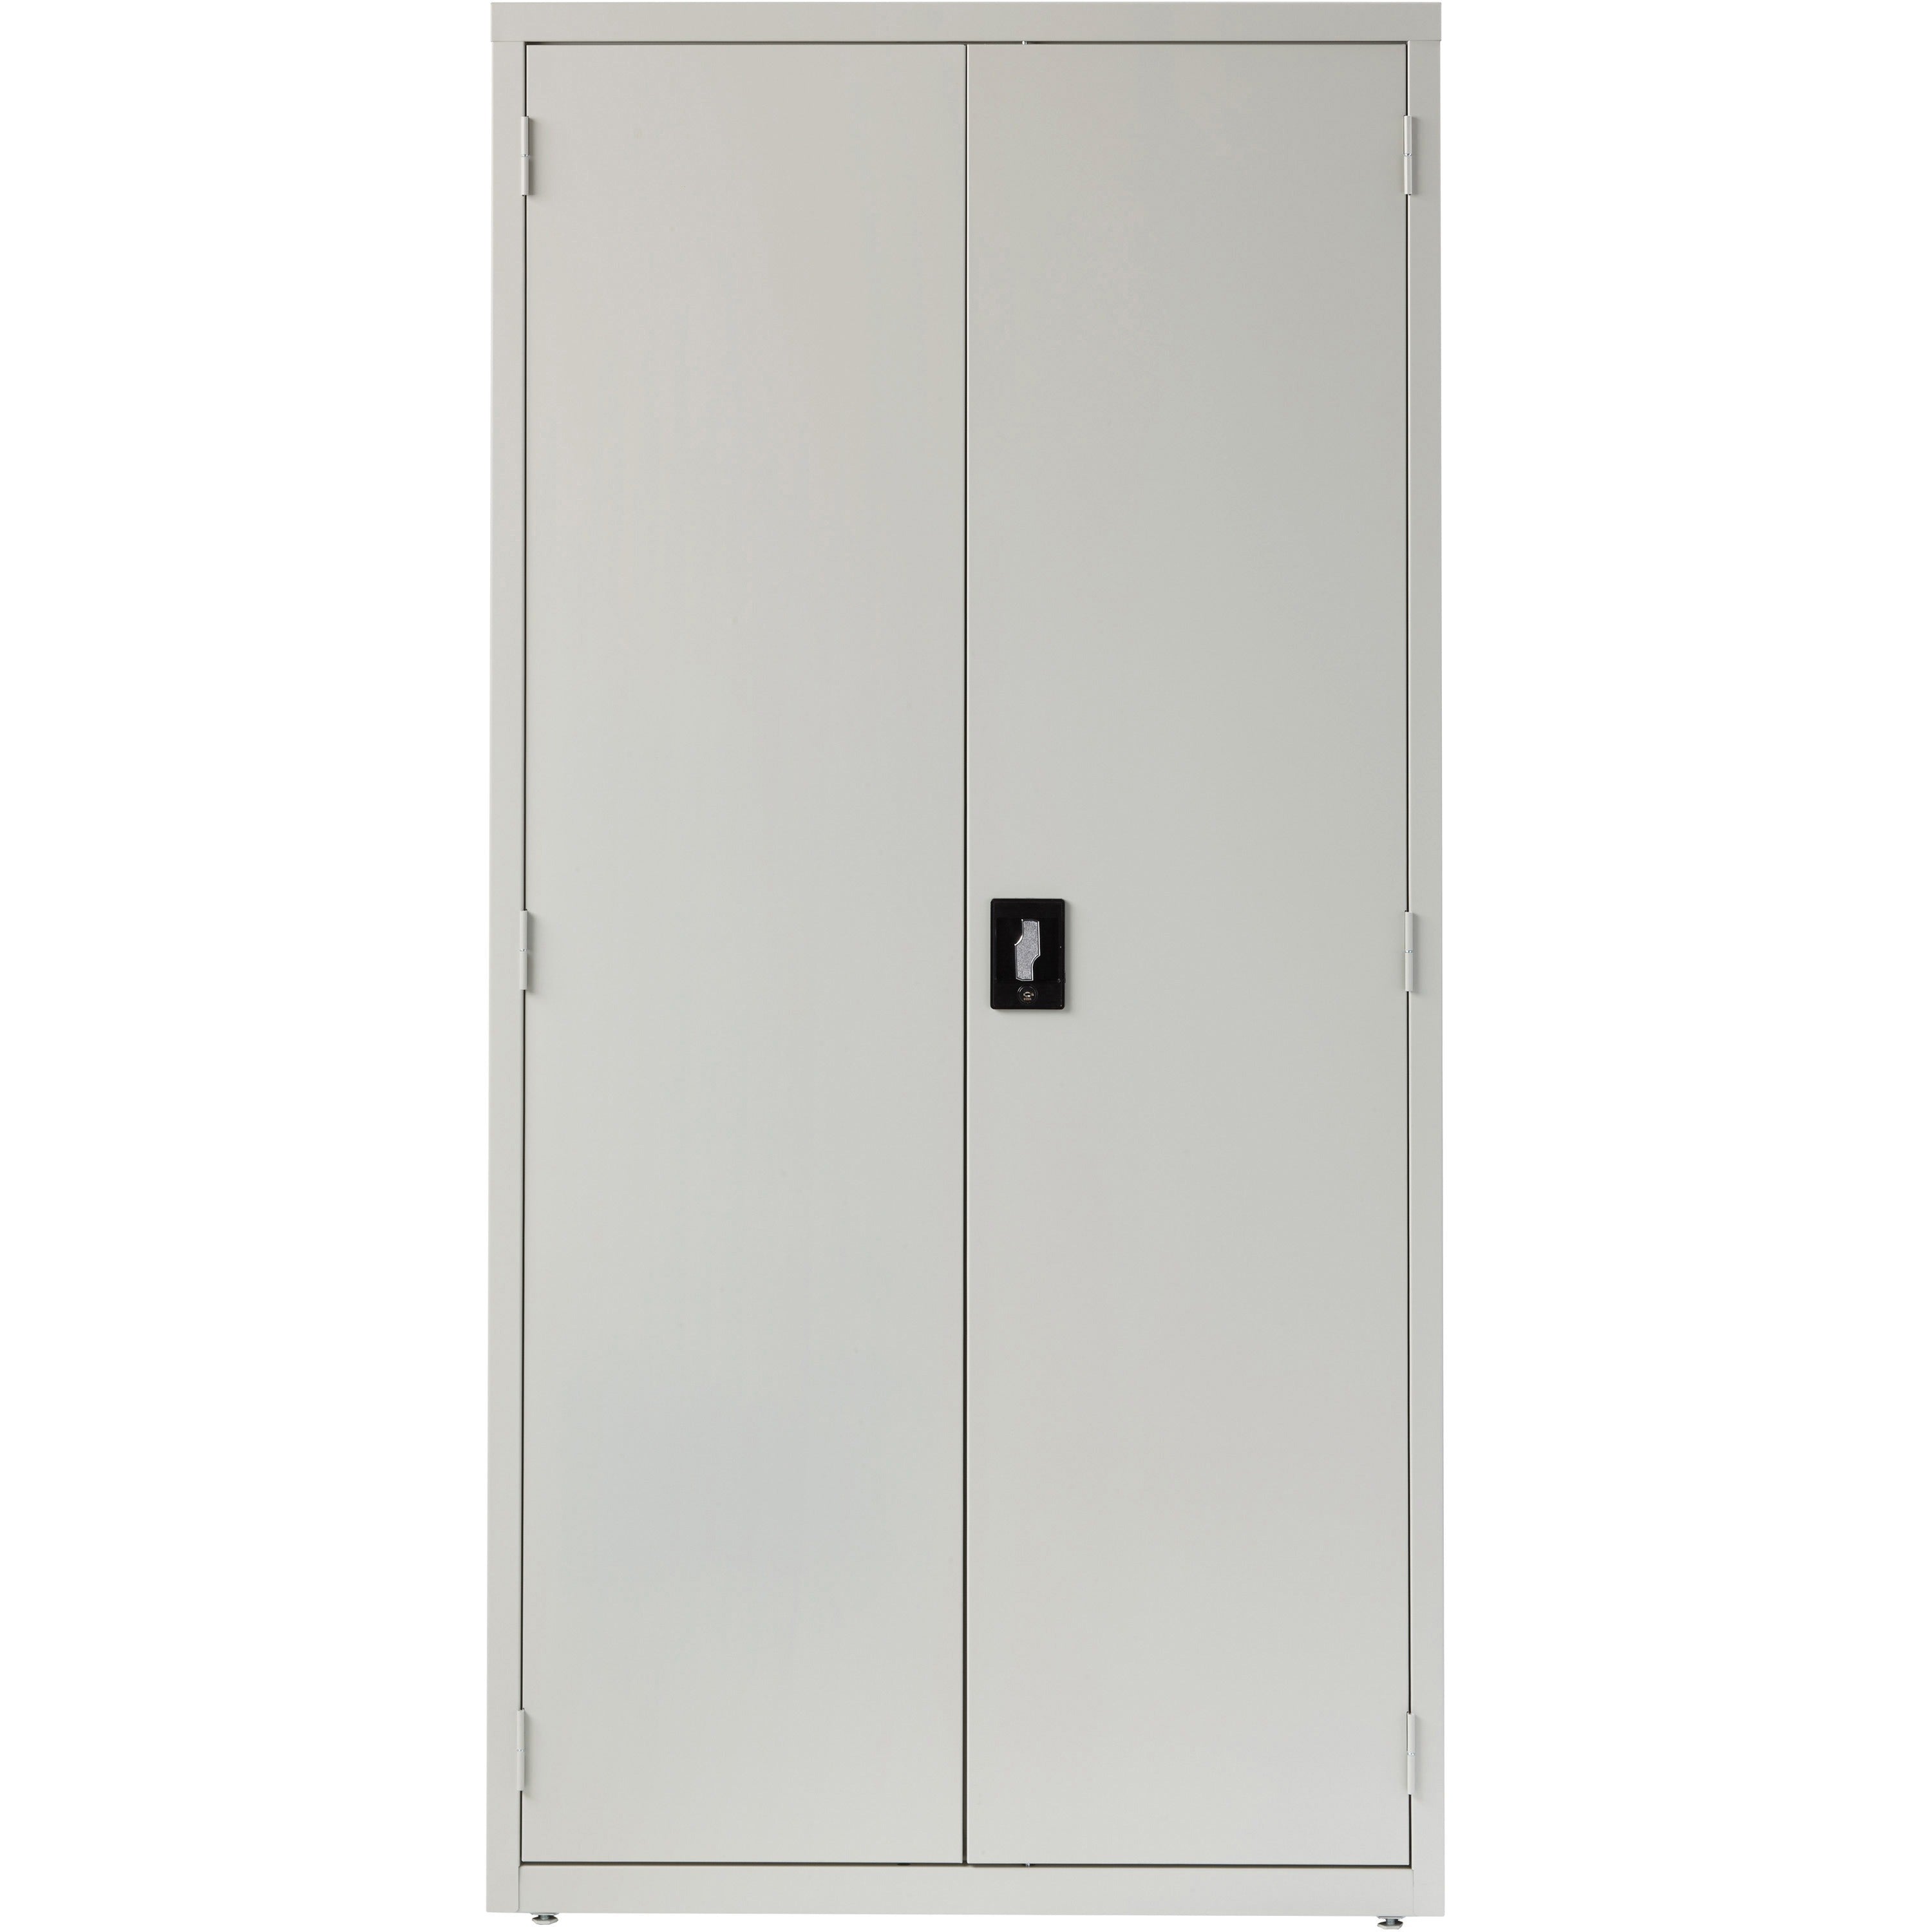 Lorell Fortress Series Storage Cabinet - 36" x 18" x 72" - 5 x Shelf(ves) - Recessed Locking Handle, Hinged Door, Durable - Light Gray - Powder Coated - Steel - Recycled - 